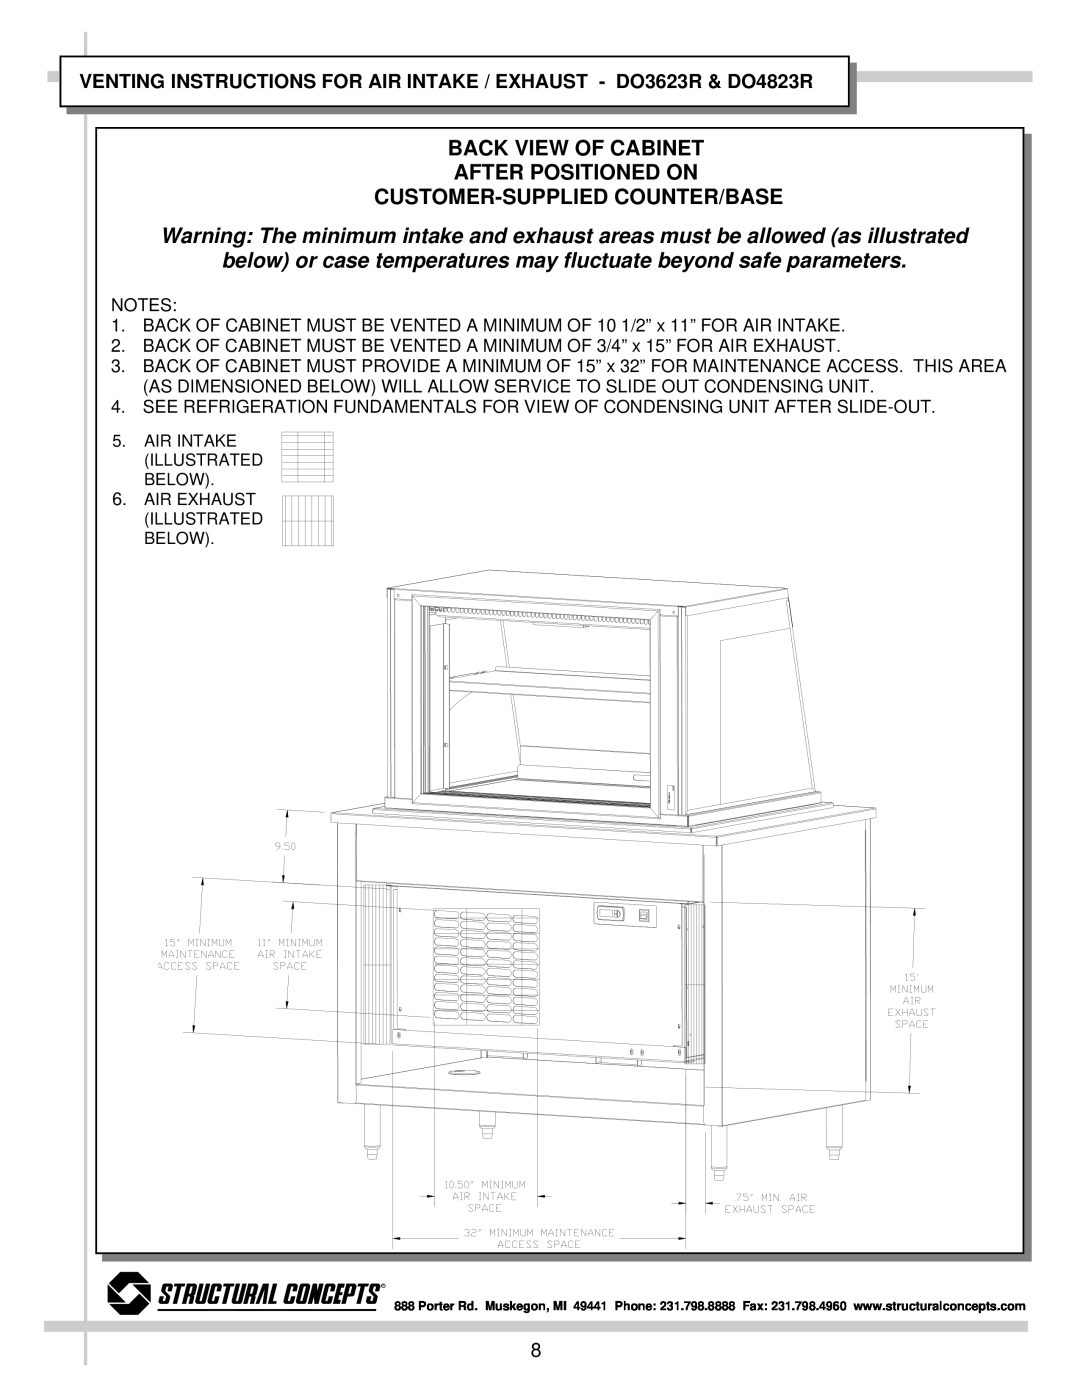 Impulse DO4823R, DO4837R, DO3637R, DO3623R dimensions Back View Of Cabinet After Positioned On, Customer-Suppliedcounter/Base 